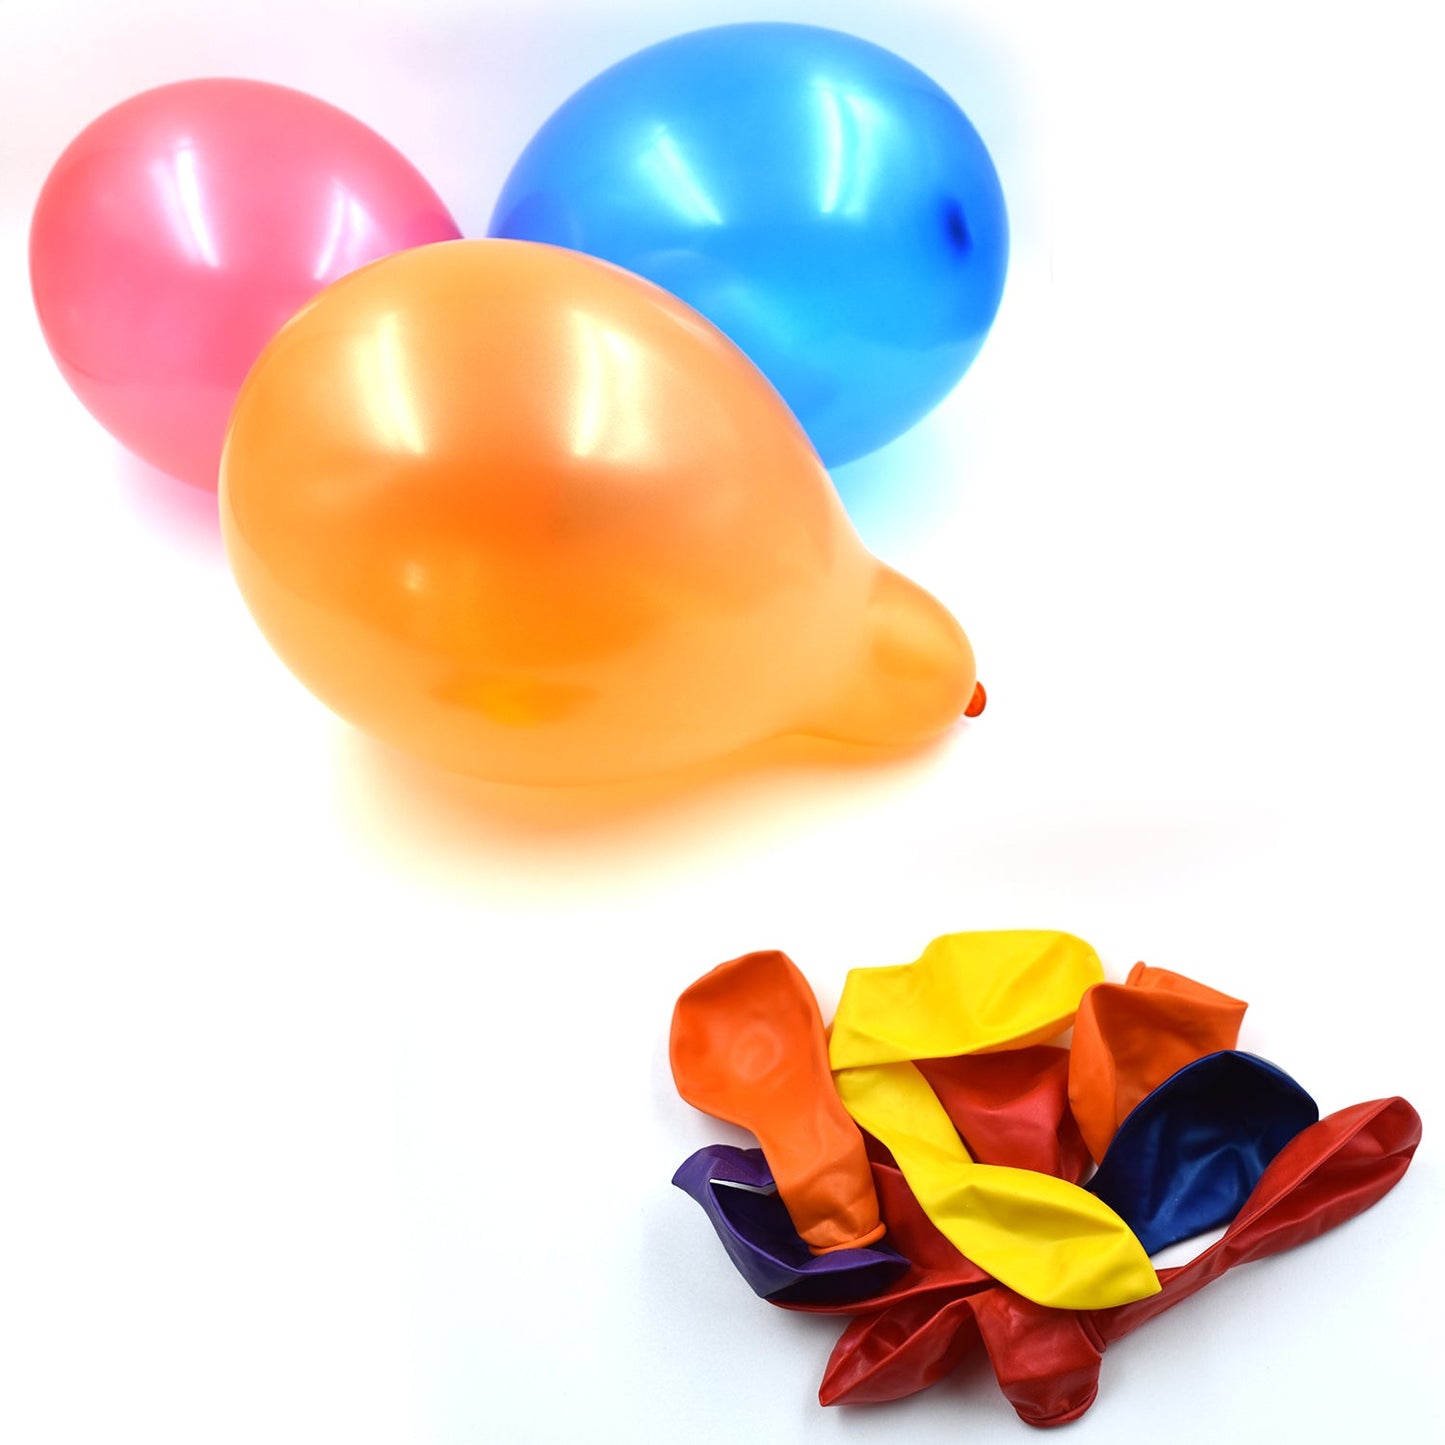 4786 Birthday Balloon used in birthday parties and get togethers in all kinds of places. (Pack of 2150Pc) DeoDap